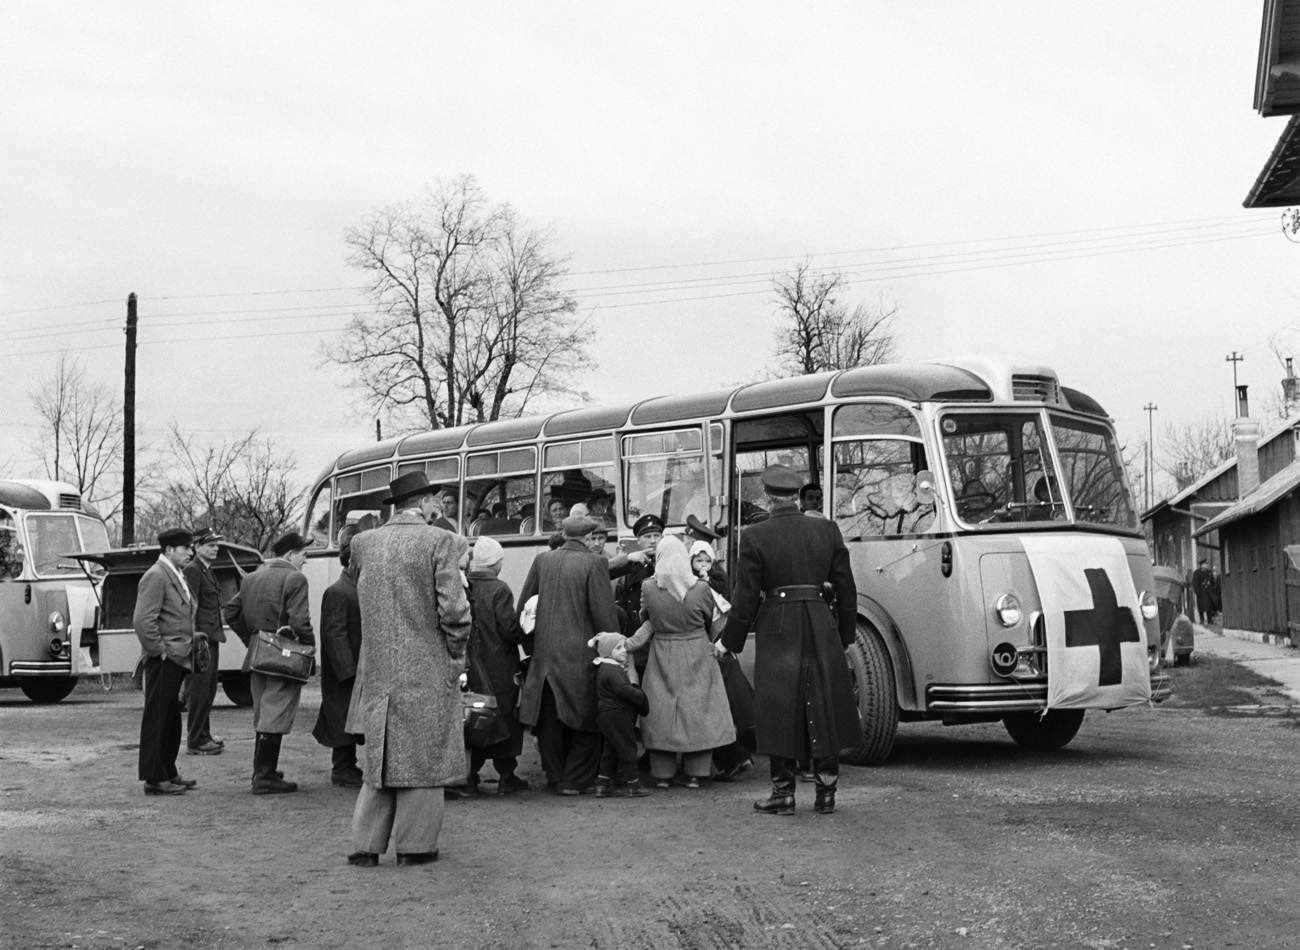 Refugees from the Hungarian revolution board a Swiss Post bus at a refugee camp in Austria in December 1956. Swiss Post sent 25 Postbuses to Austria to ensure the transport of the refugees.